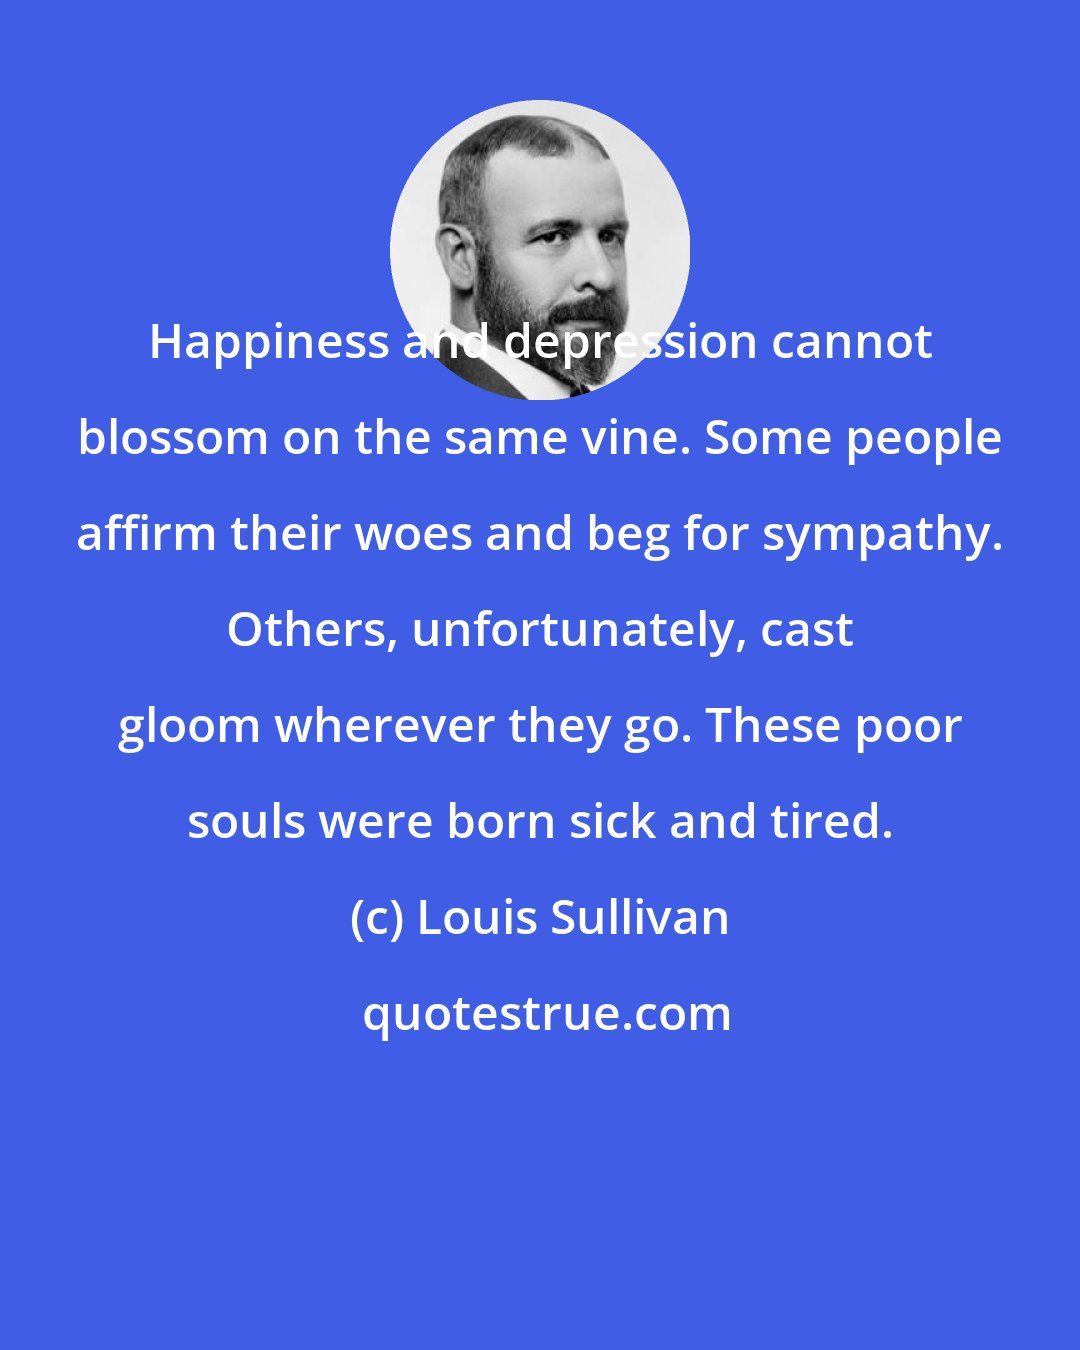 Louis Sullivan: Happiness and depression cannot blossom on the same vine. Some people affirm their woes and beg for sympathy. Others, unfortunately, cast gloom wherever they go. These poor souls were born sick and tired.